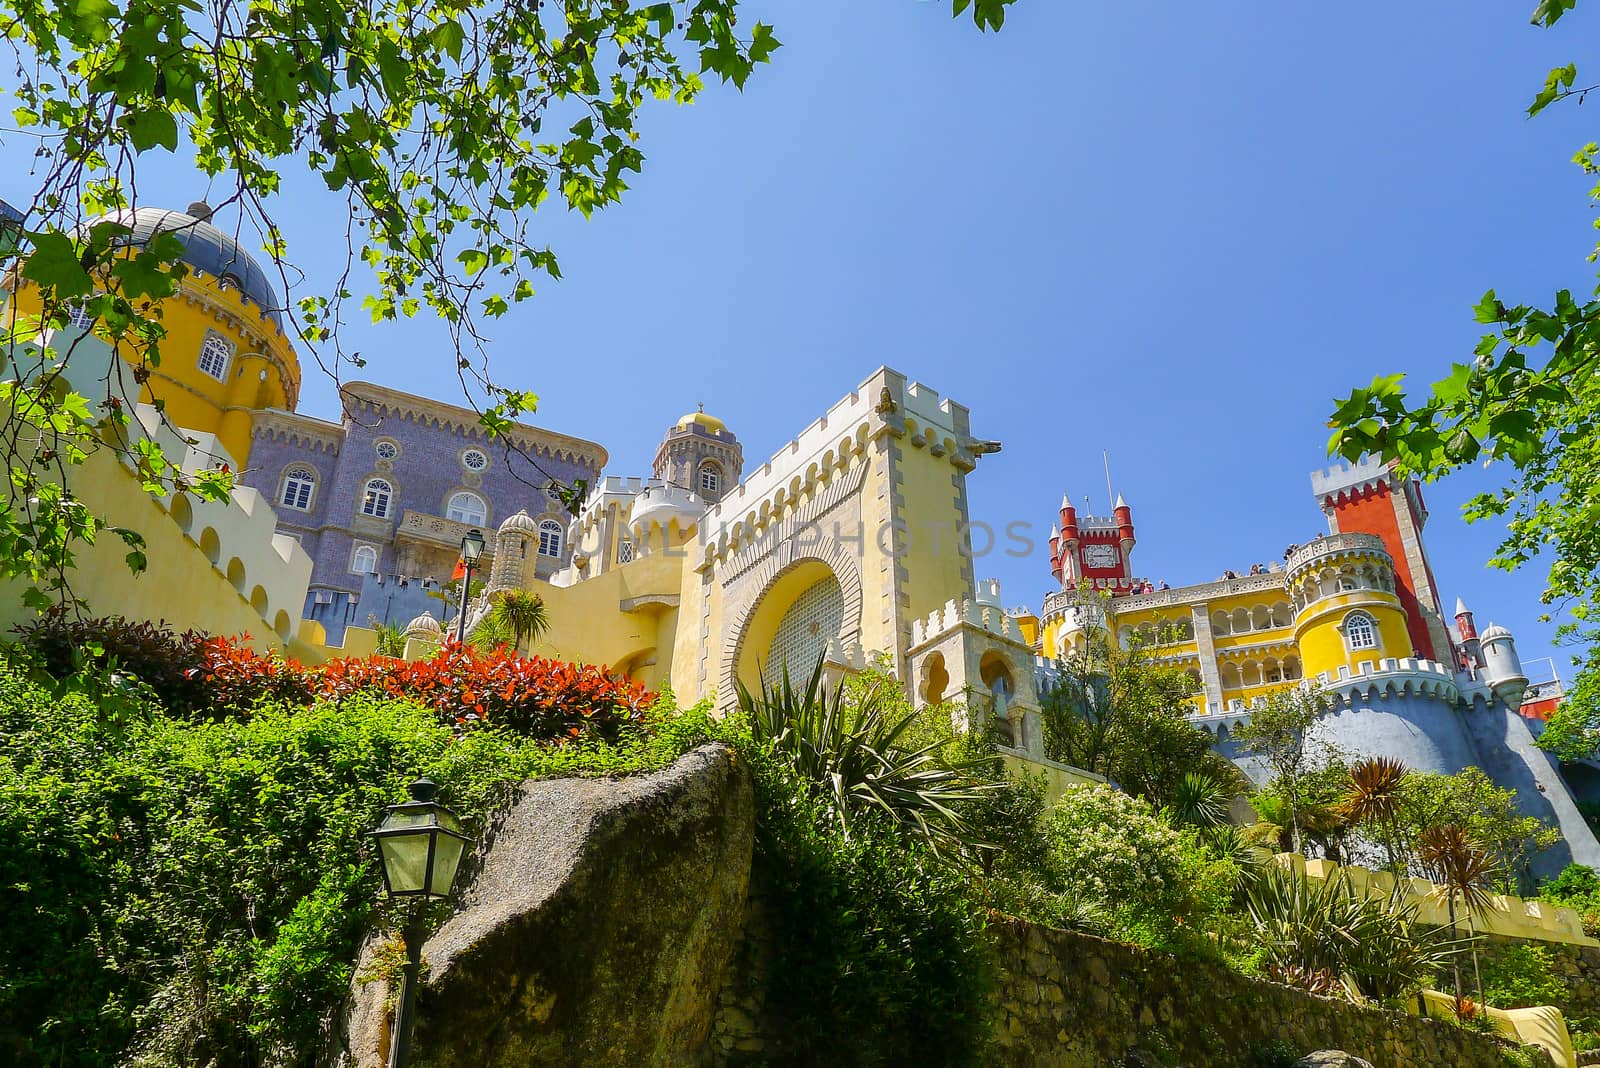 Pena National Palace at Sintra in Portugal